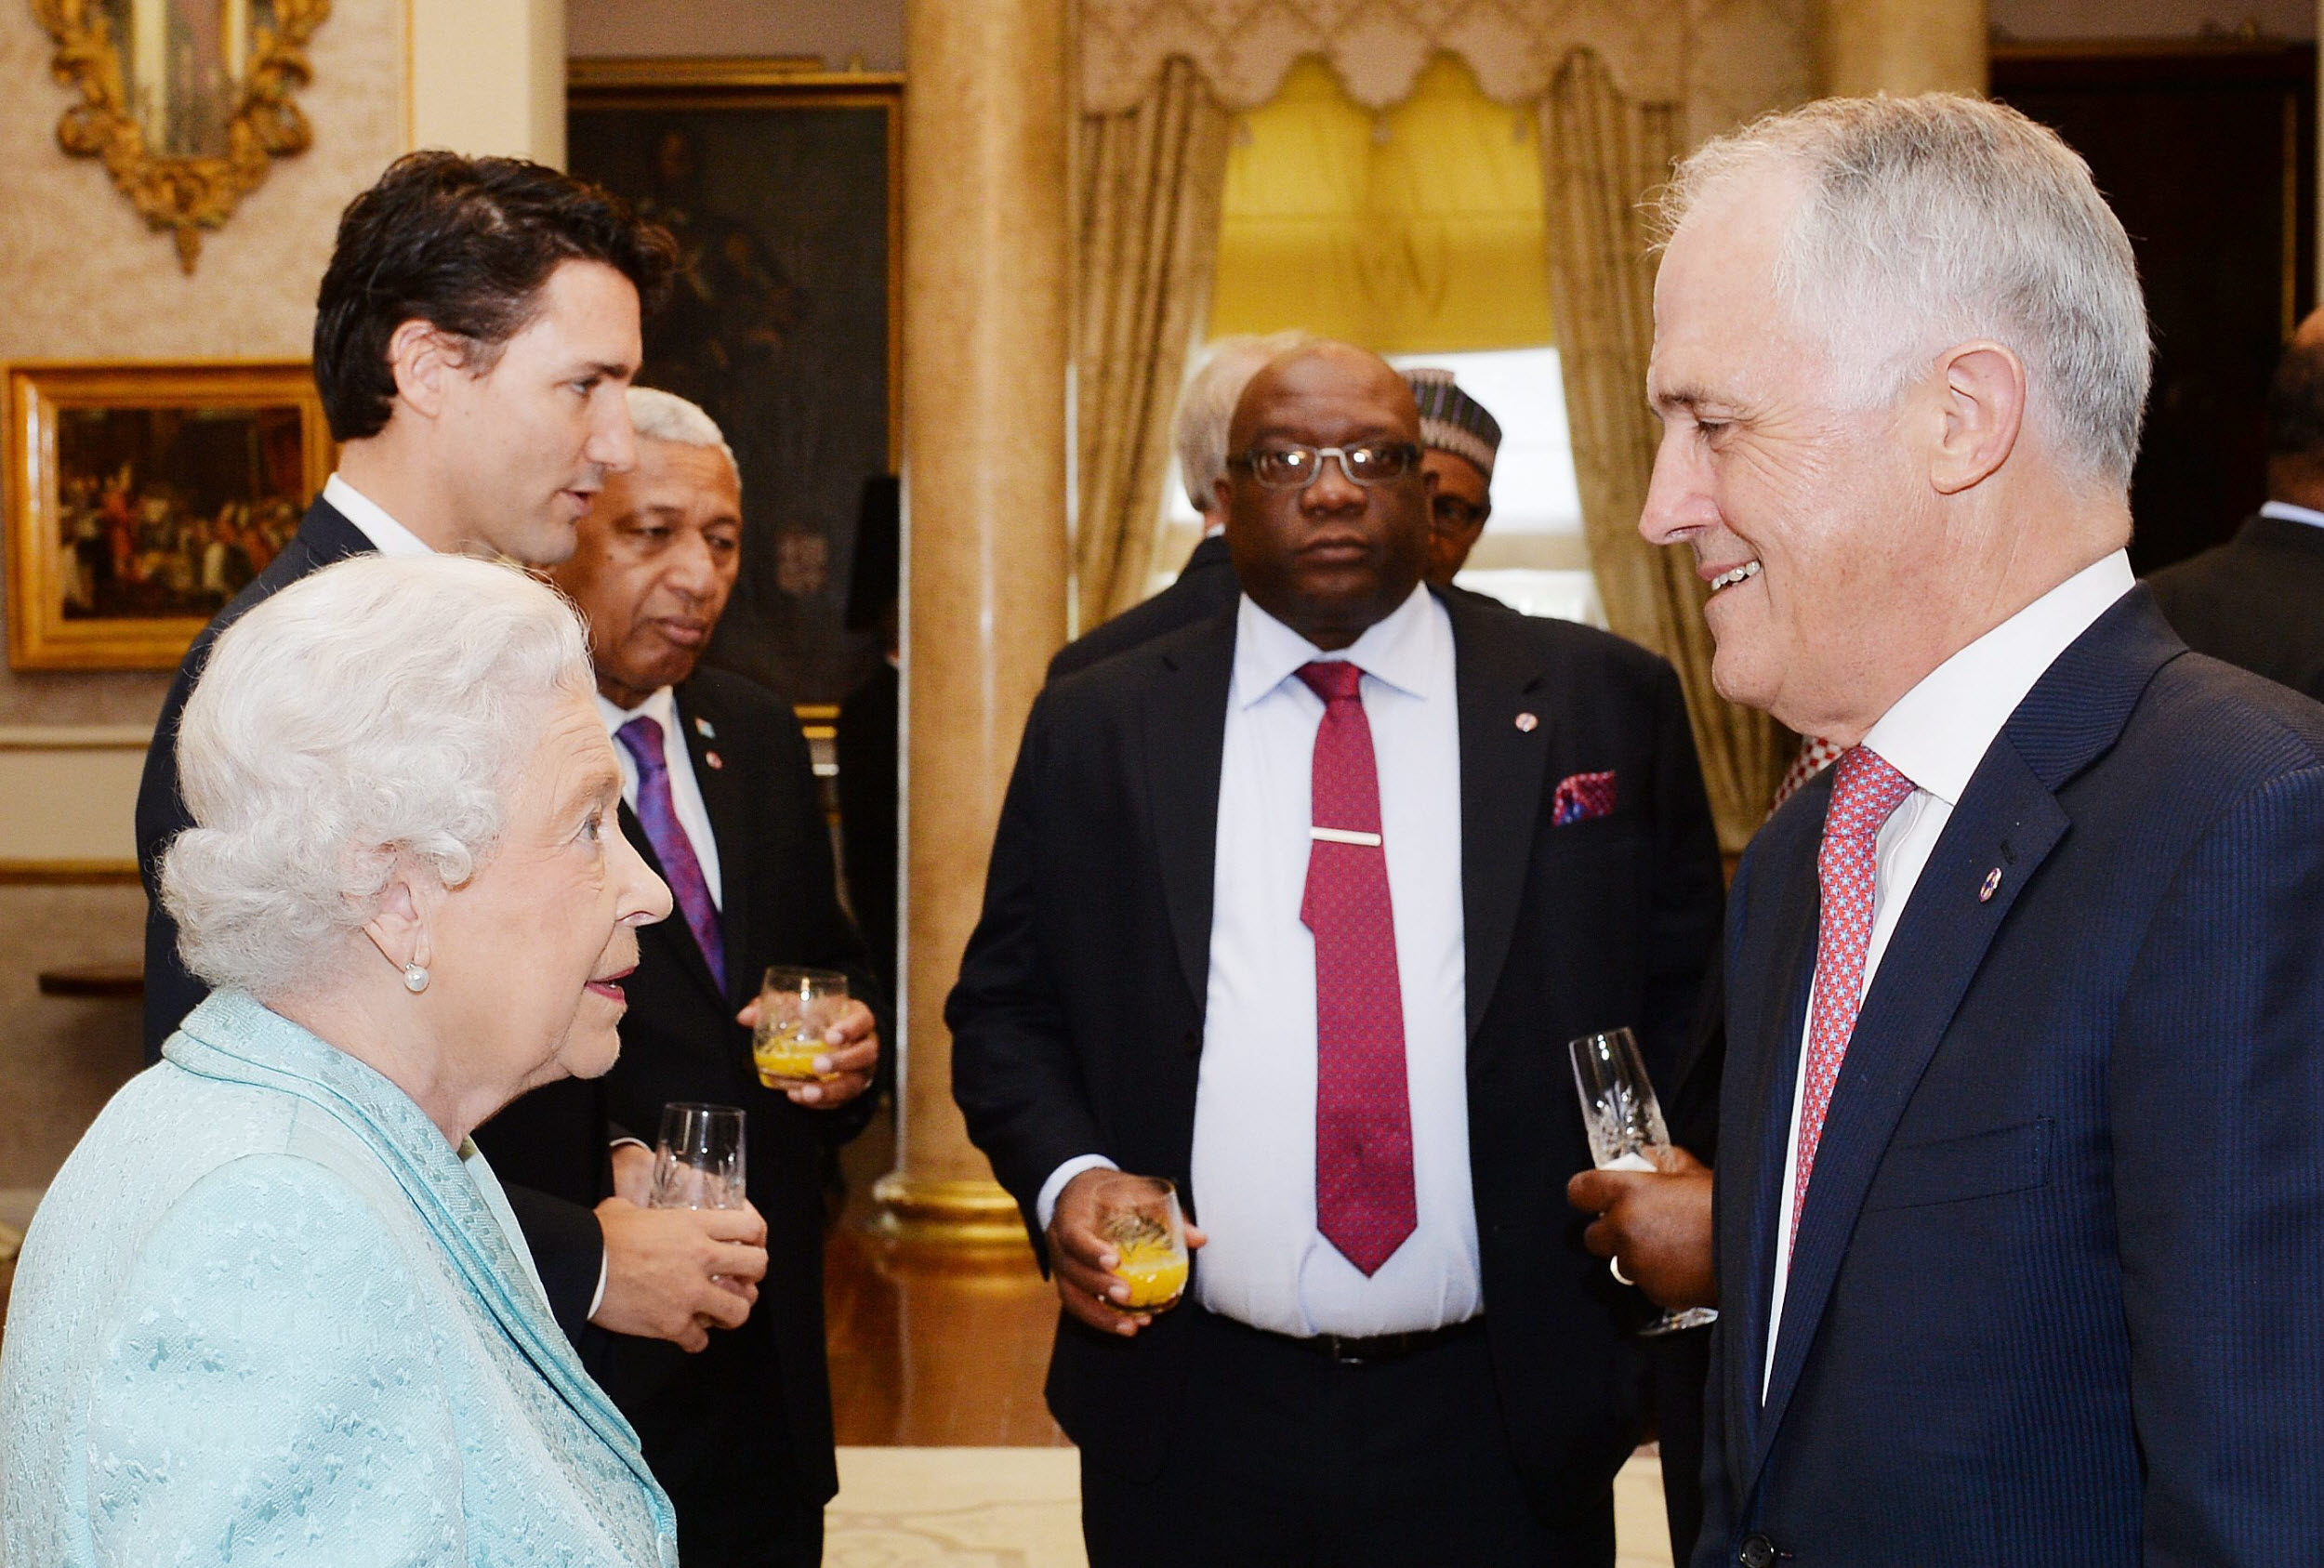 Queen Elizabeth II talks to Malcolm Turnbull at a Commonwealth meeting in Malta in 2015.  